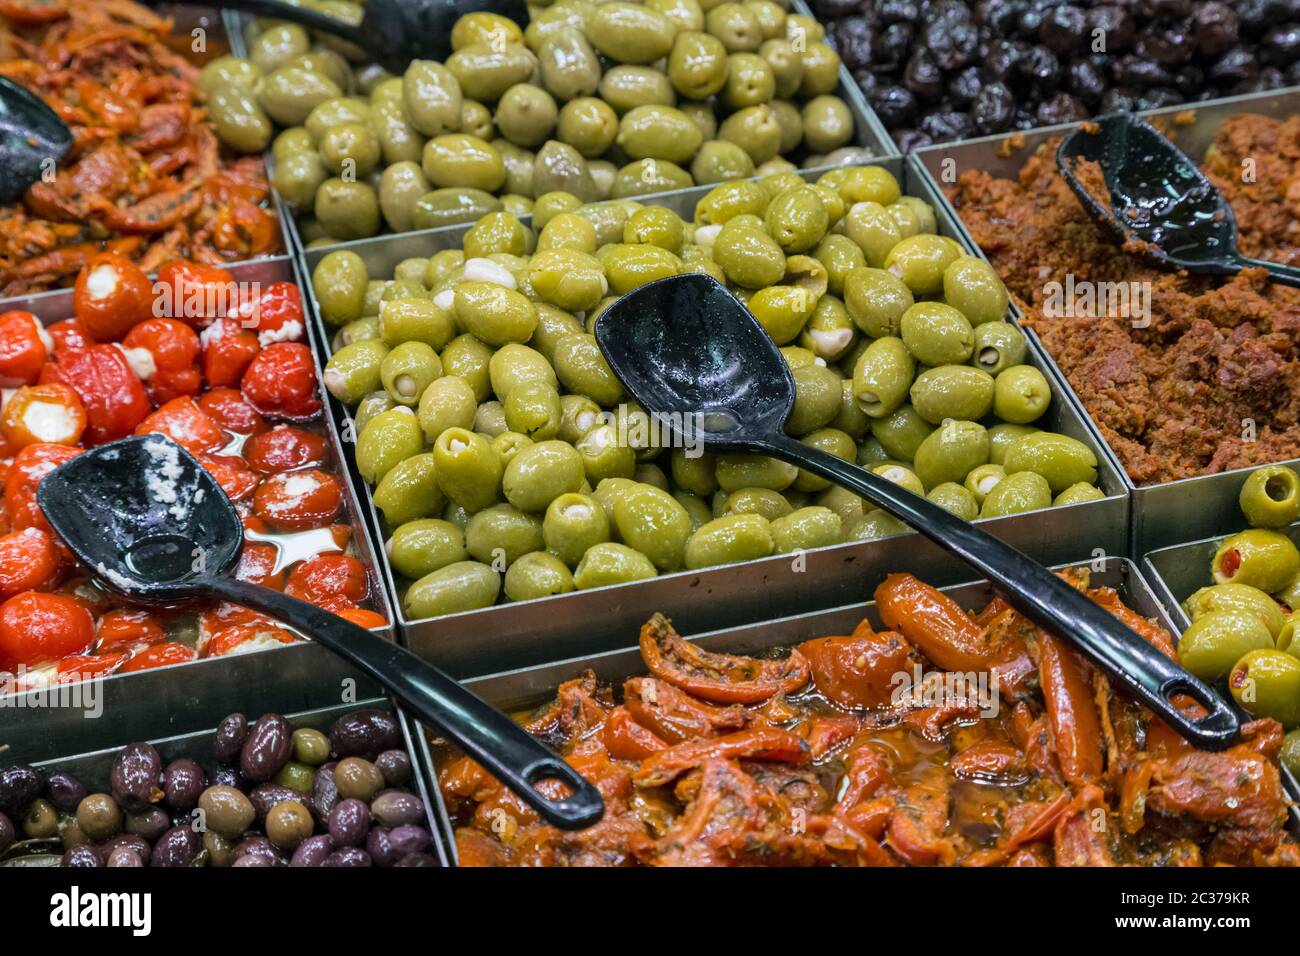 Olives and peppers on sale at a self service stall in a SuperValu store in Clonakilty, West Cork, County Cork, Republic of Ireland. Stock Photo